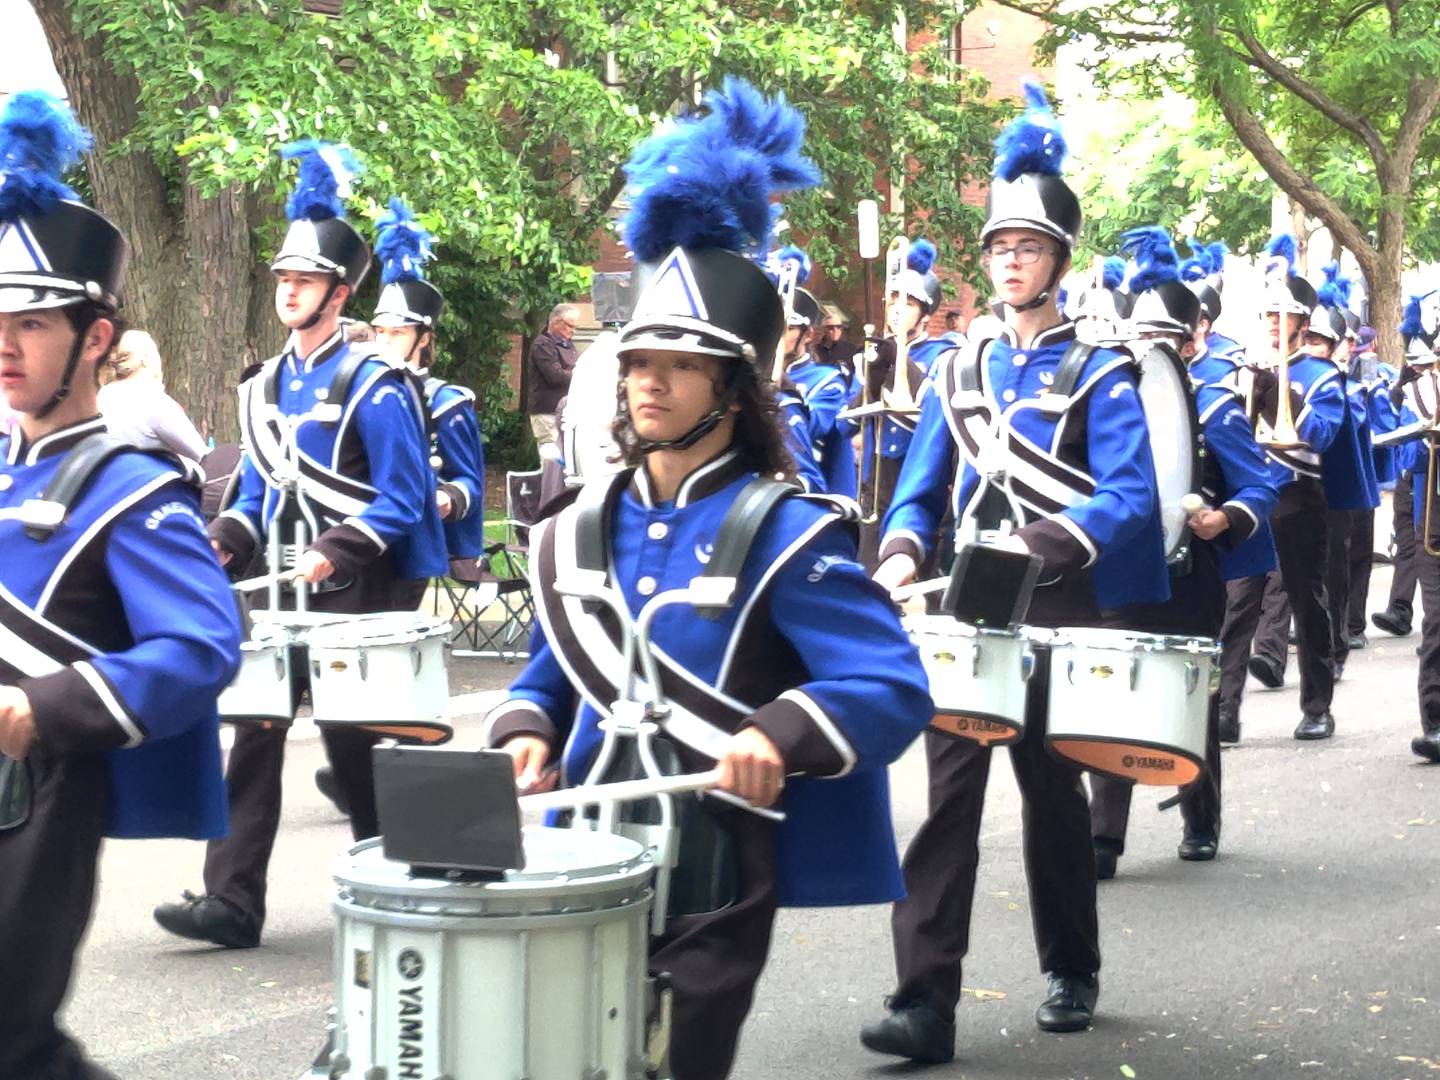 Geneva High School's marching band in 2024 Memorial Day parade